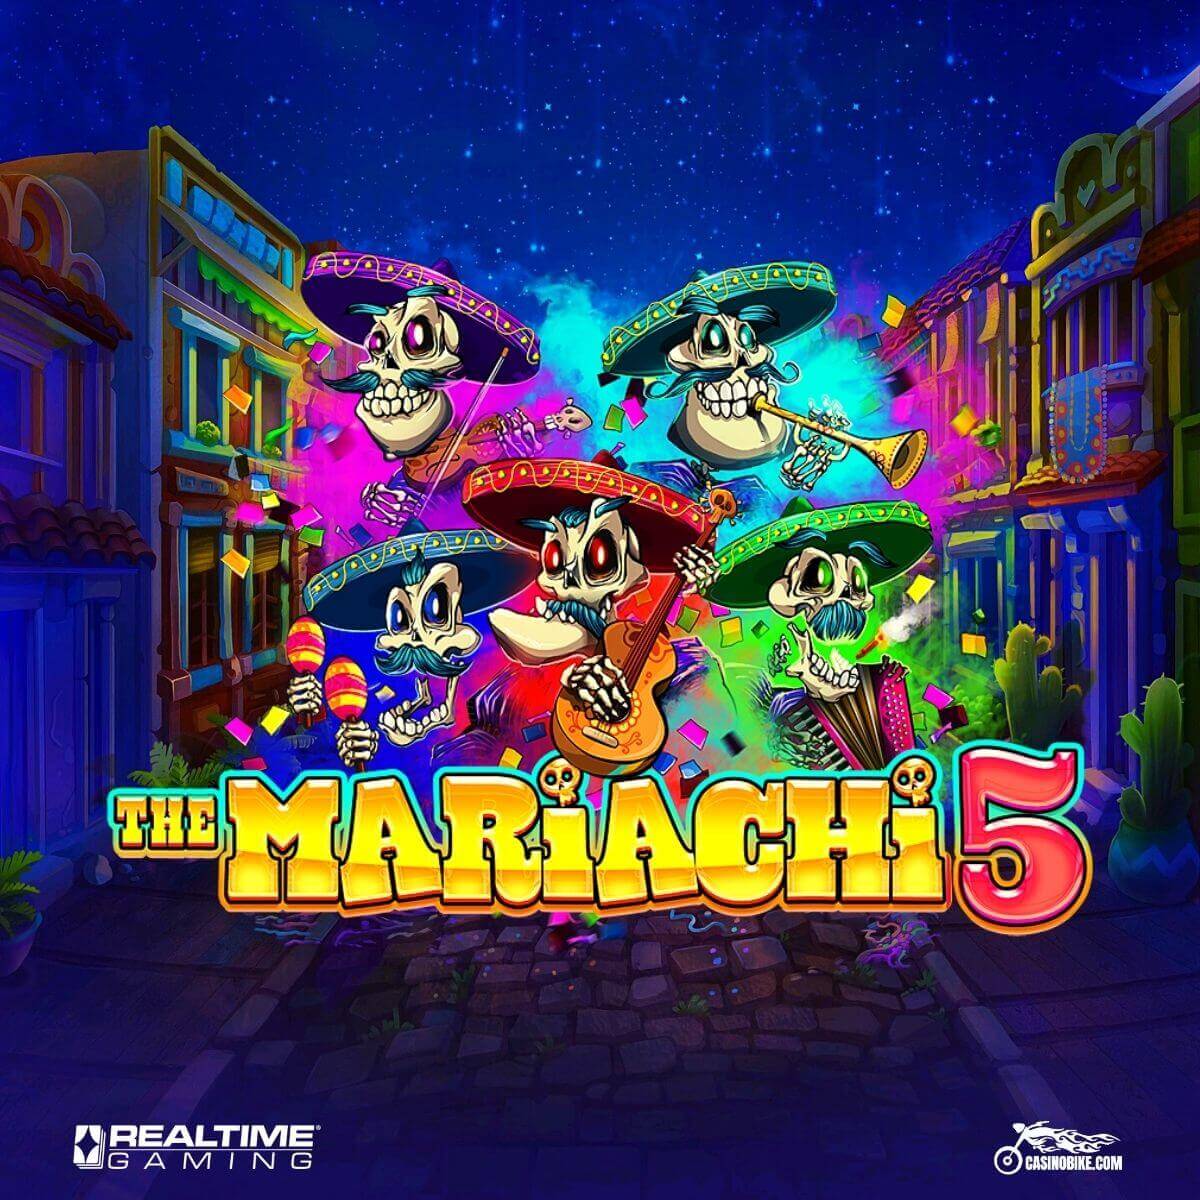 The Mariachi 5 Slot by Real Time Gaming